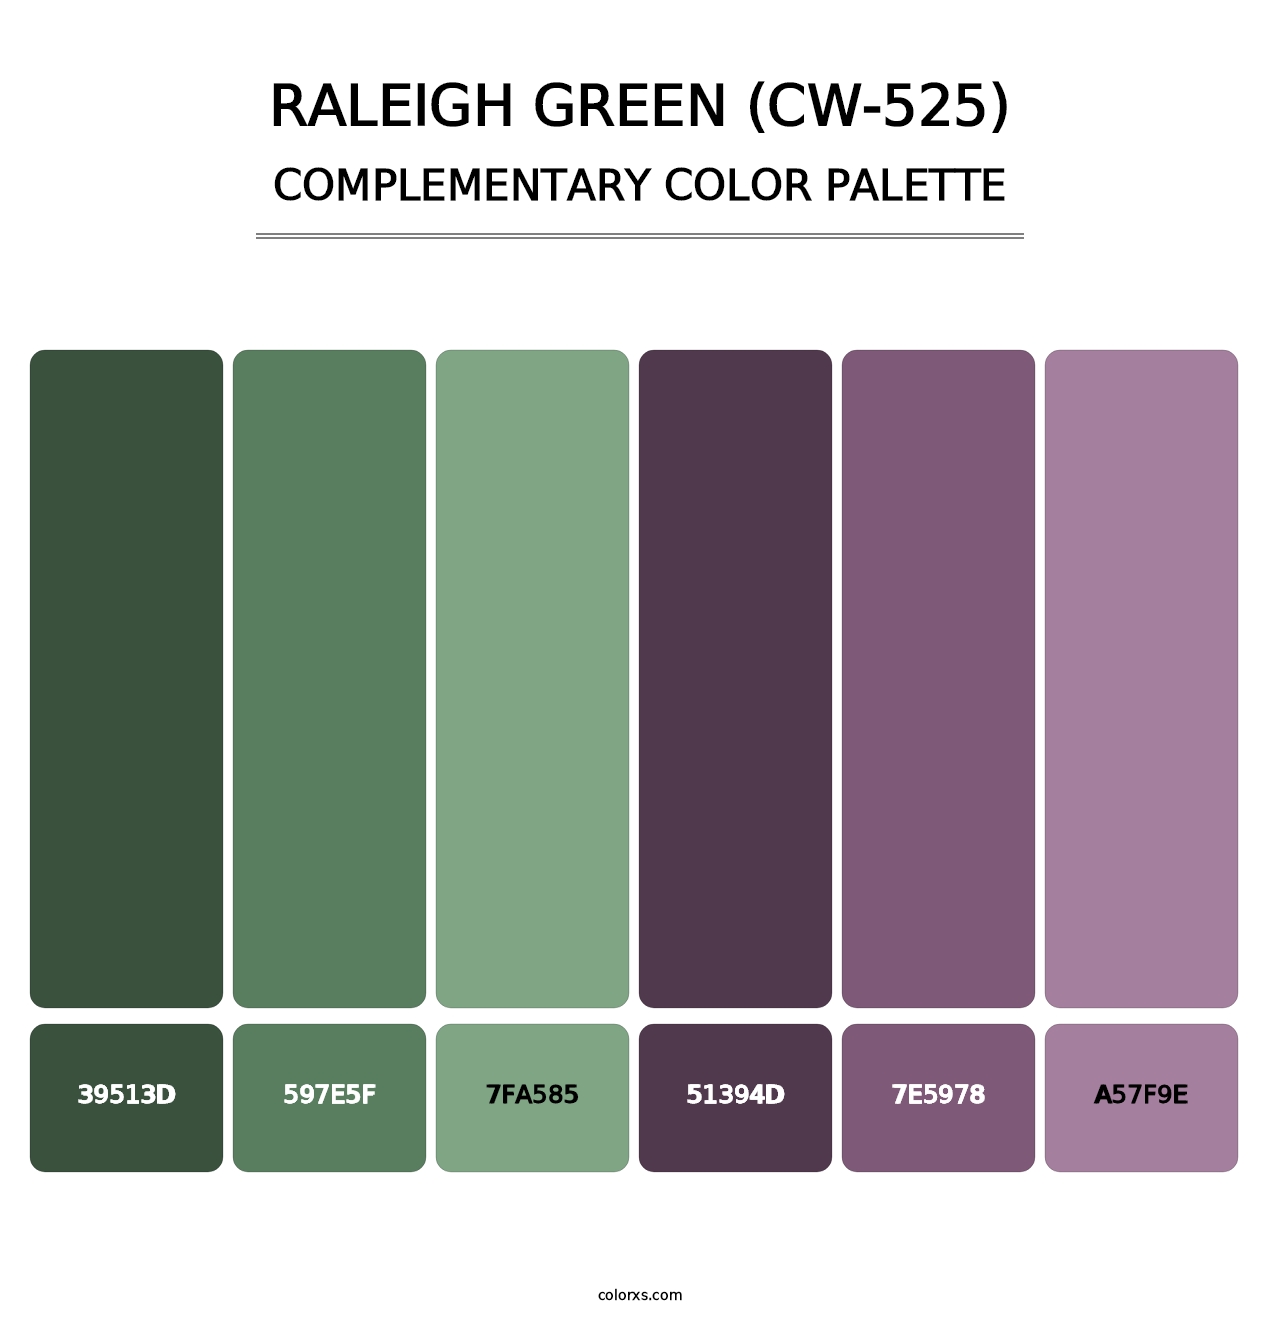 Raleigh Green (CW-525) - Complementary Color Palette